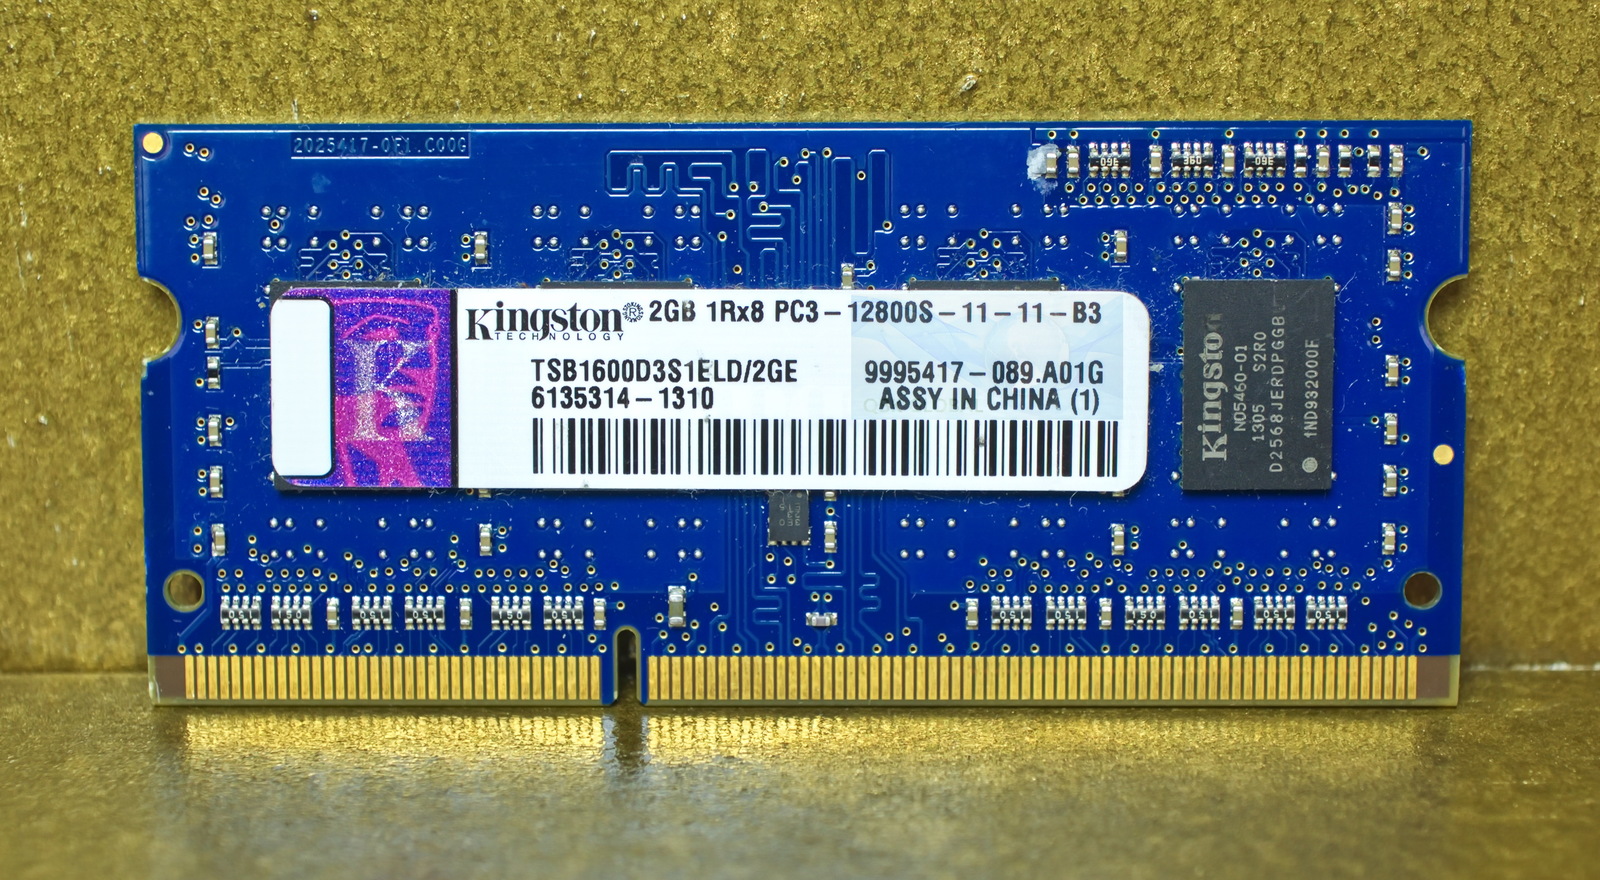 Primary image for Kingston TSB1600D3S1ELD/2GE - 2GB (1x2GB) 1600Mhz PC3-12800S DDR3-1600 204-Pin S